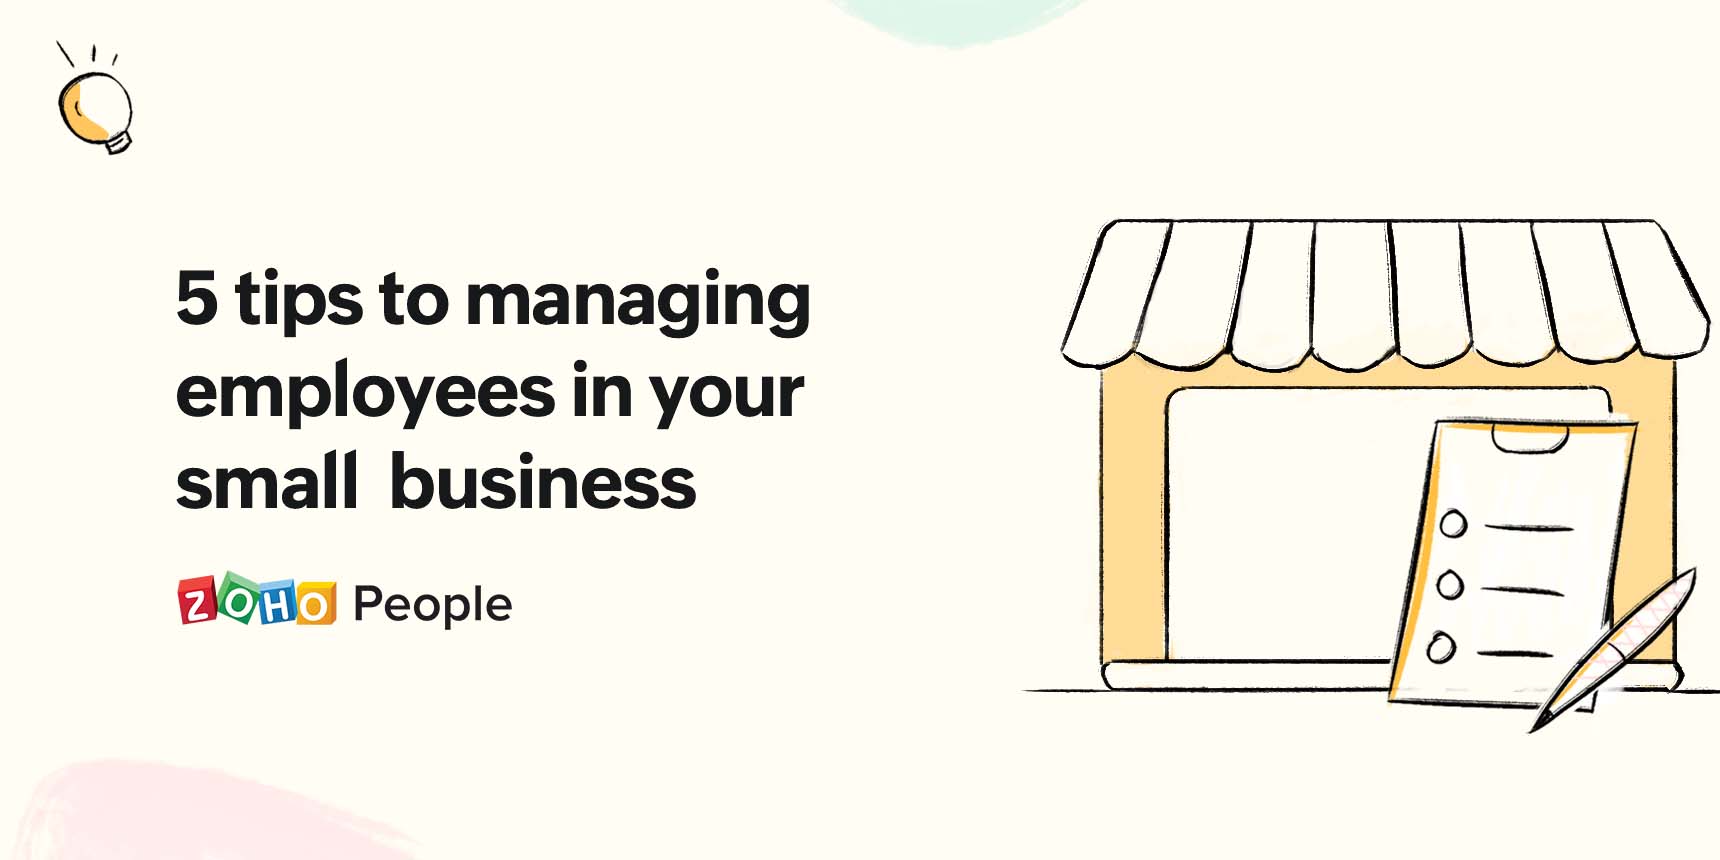 Tips to manage employees in small business